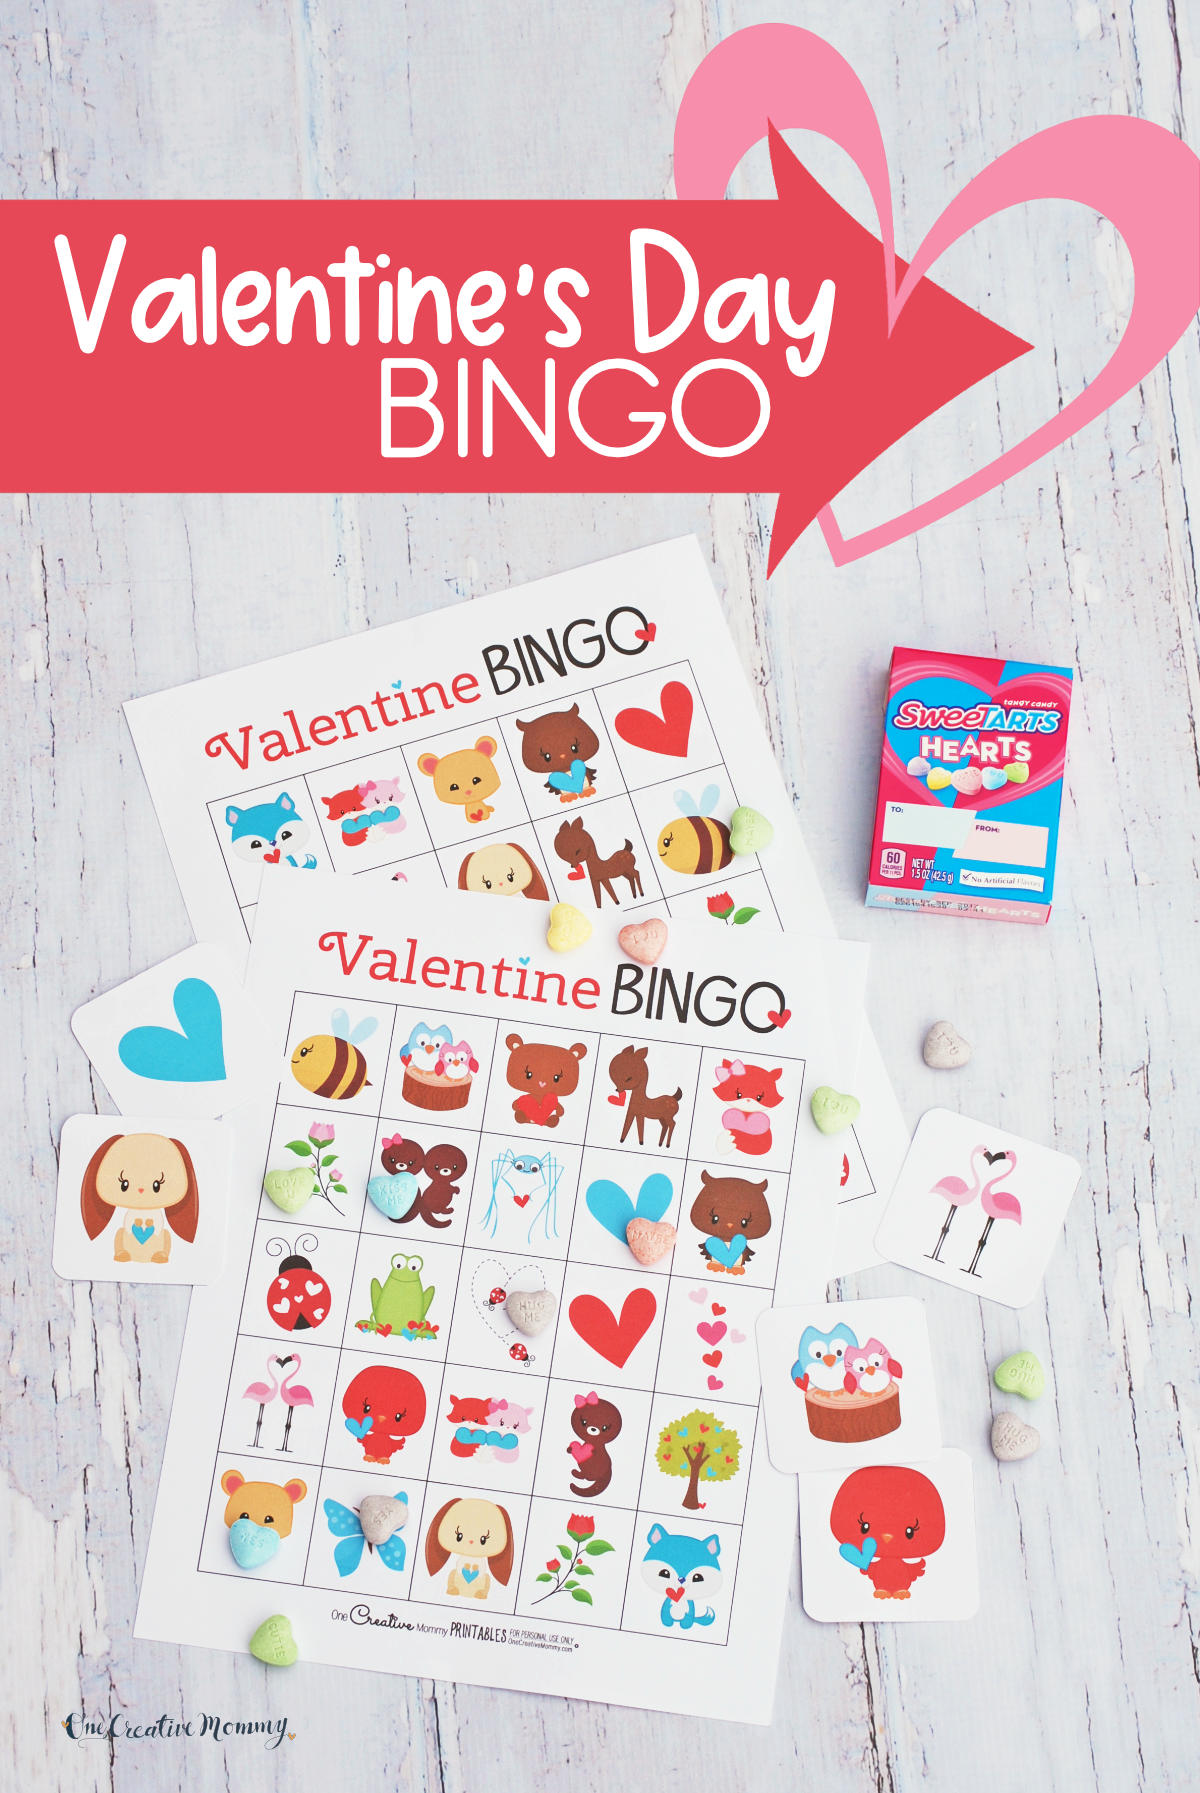 2 Valentine's Day bingo cards are stacked on top of each other with five calling cards from the game laid out across the page. Sweethearts candies are scattered across the game boards. Elements on the game include cute cartoon animals, hearts, flowers, etc.